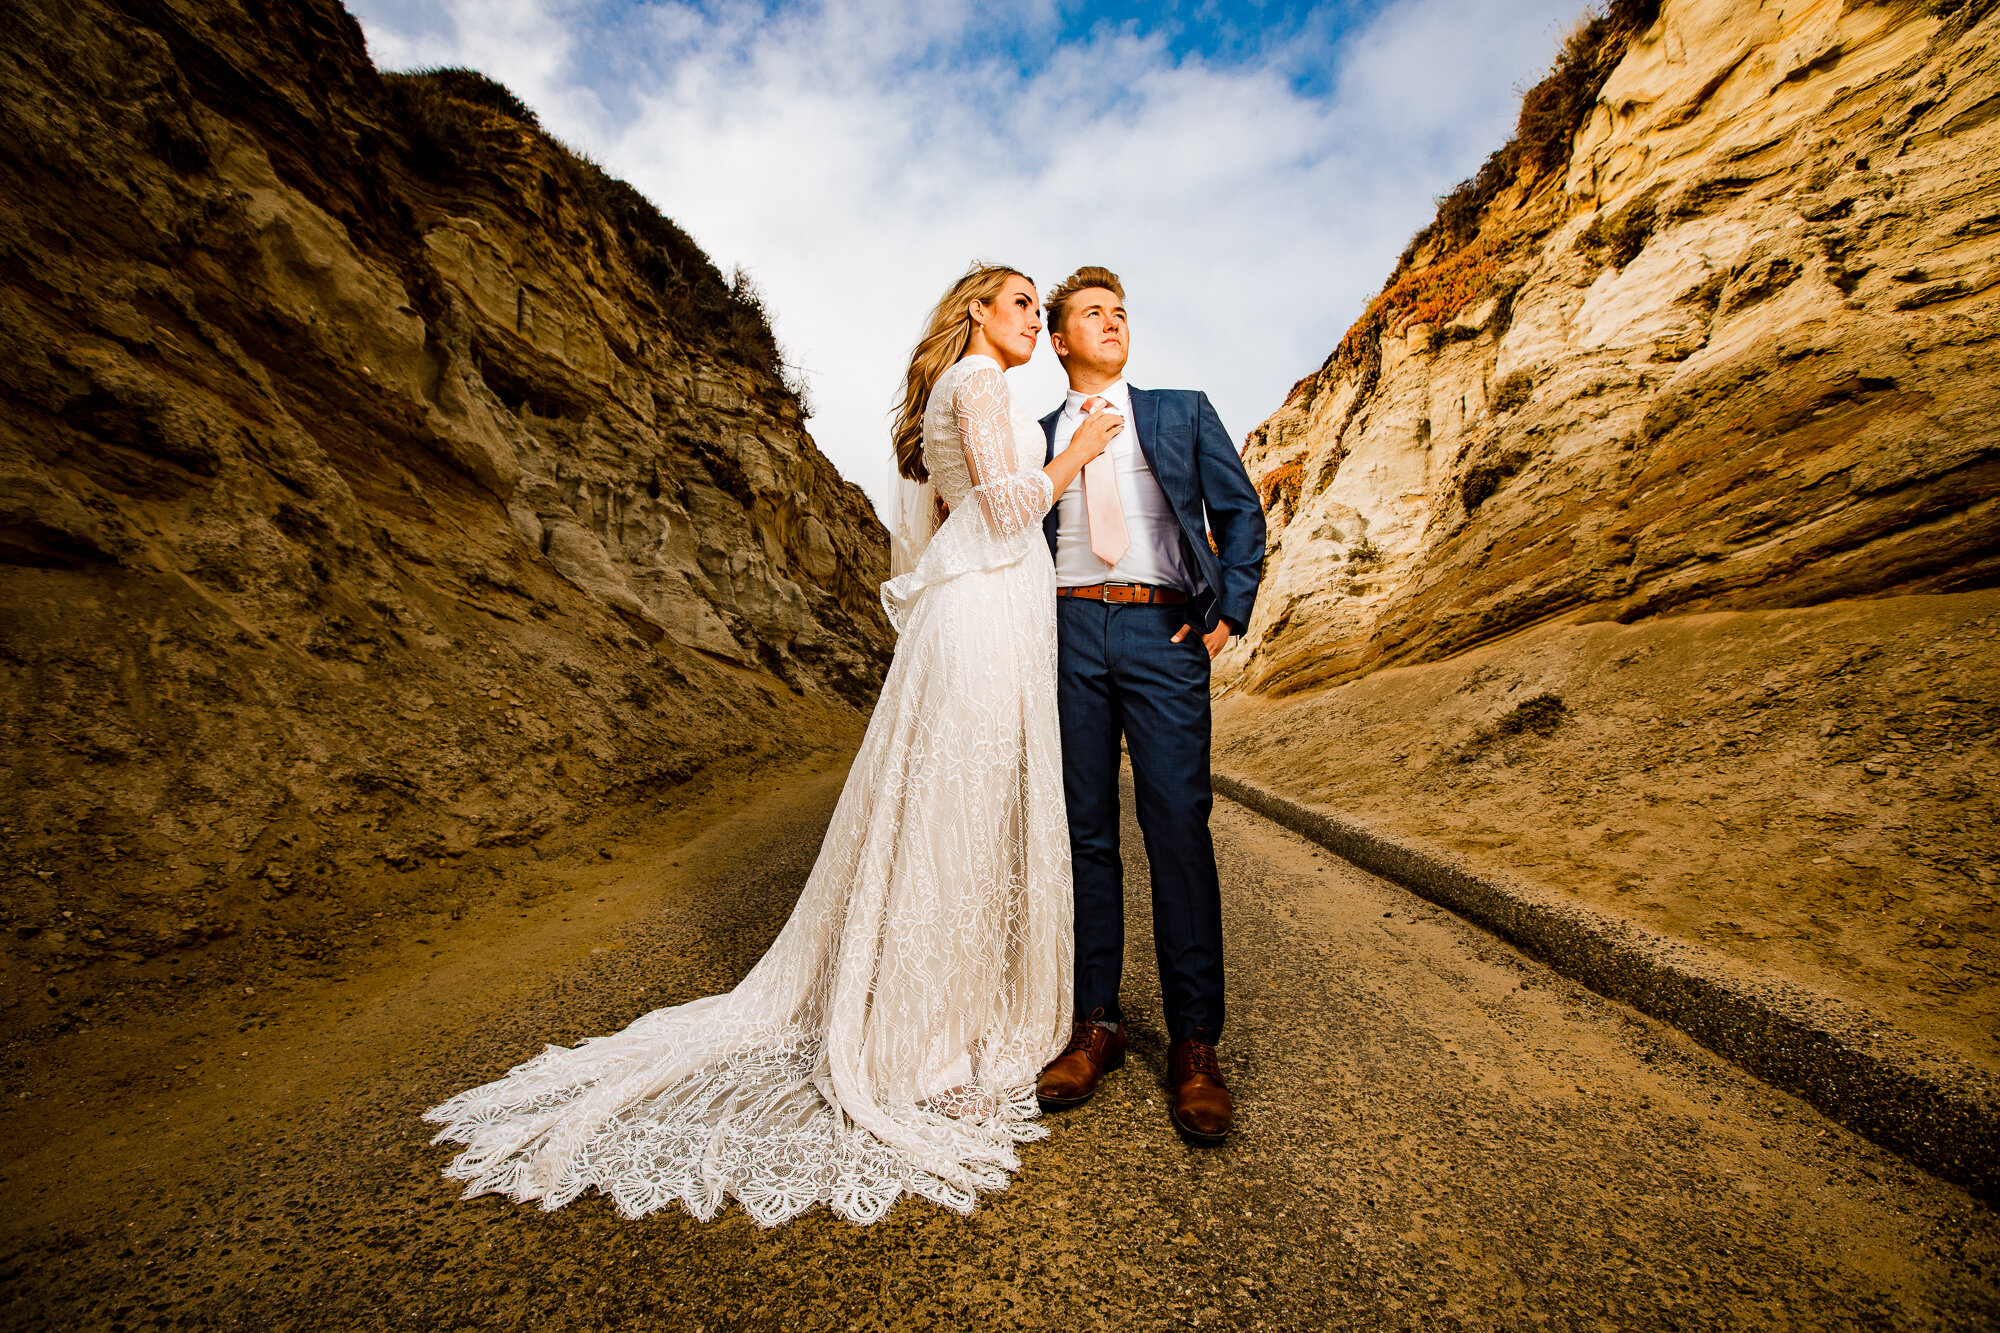 Cinematic Wedding Photography - Bride and Groom Portrait at San Clemente Shore by Wedgewood Weddings